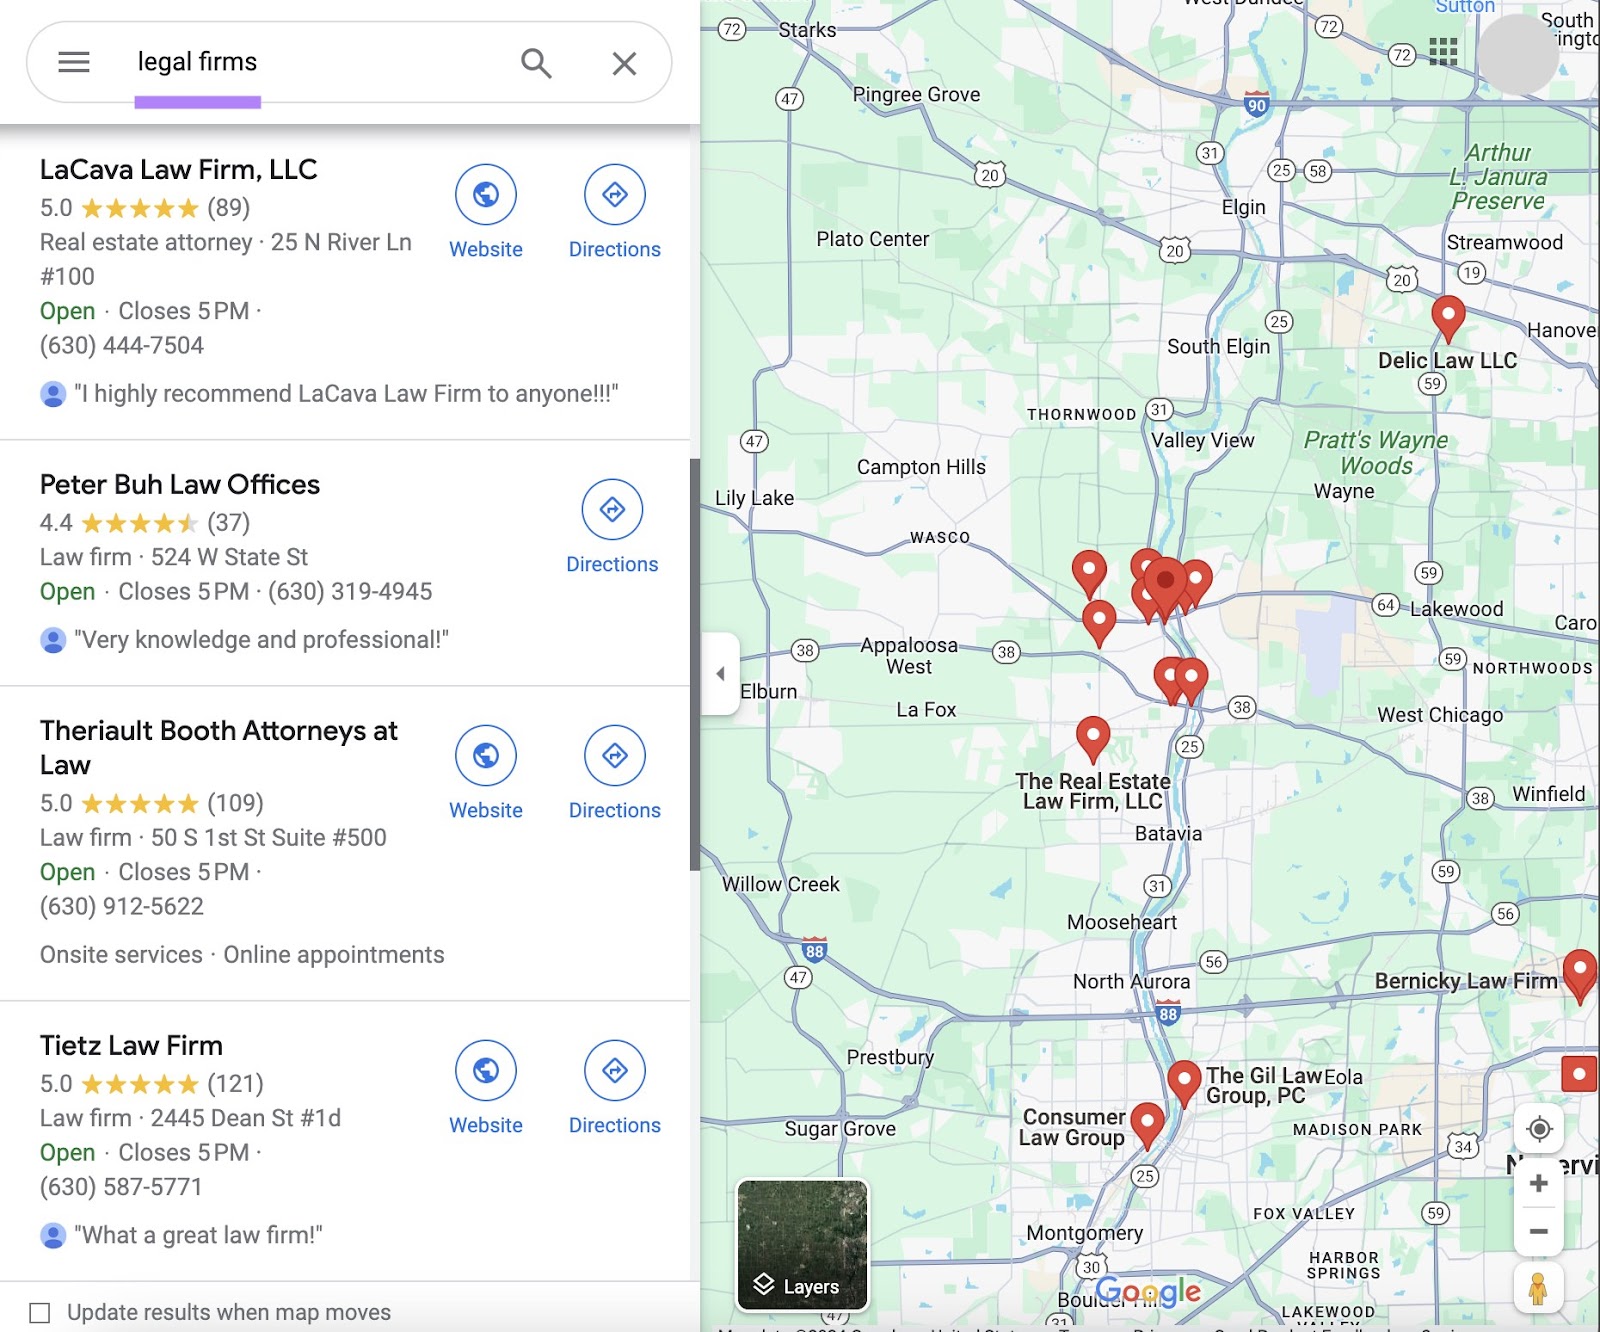 Google Maps results for "legal firms" query